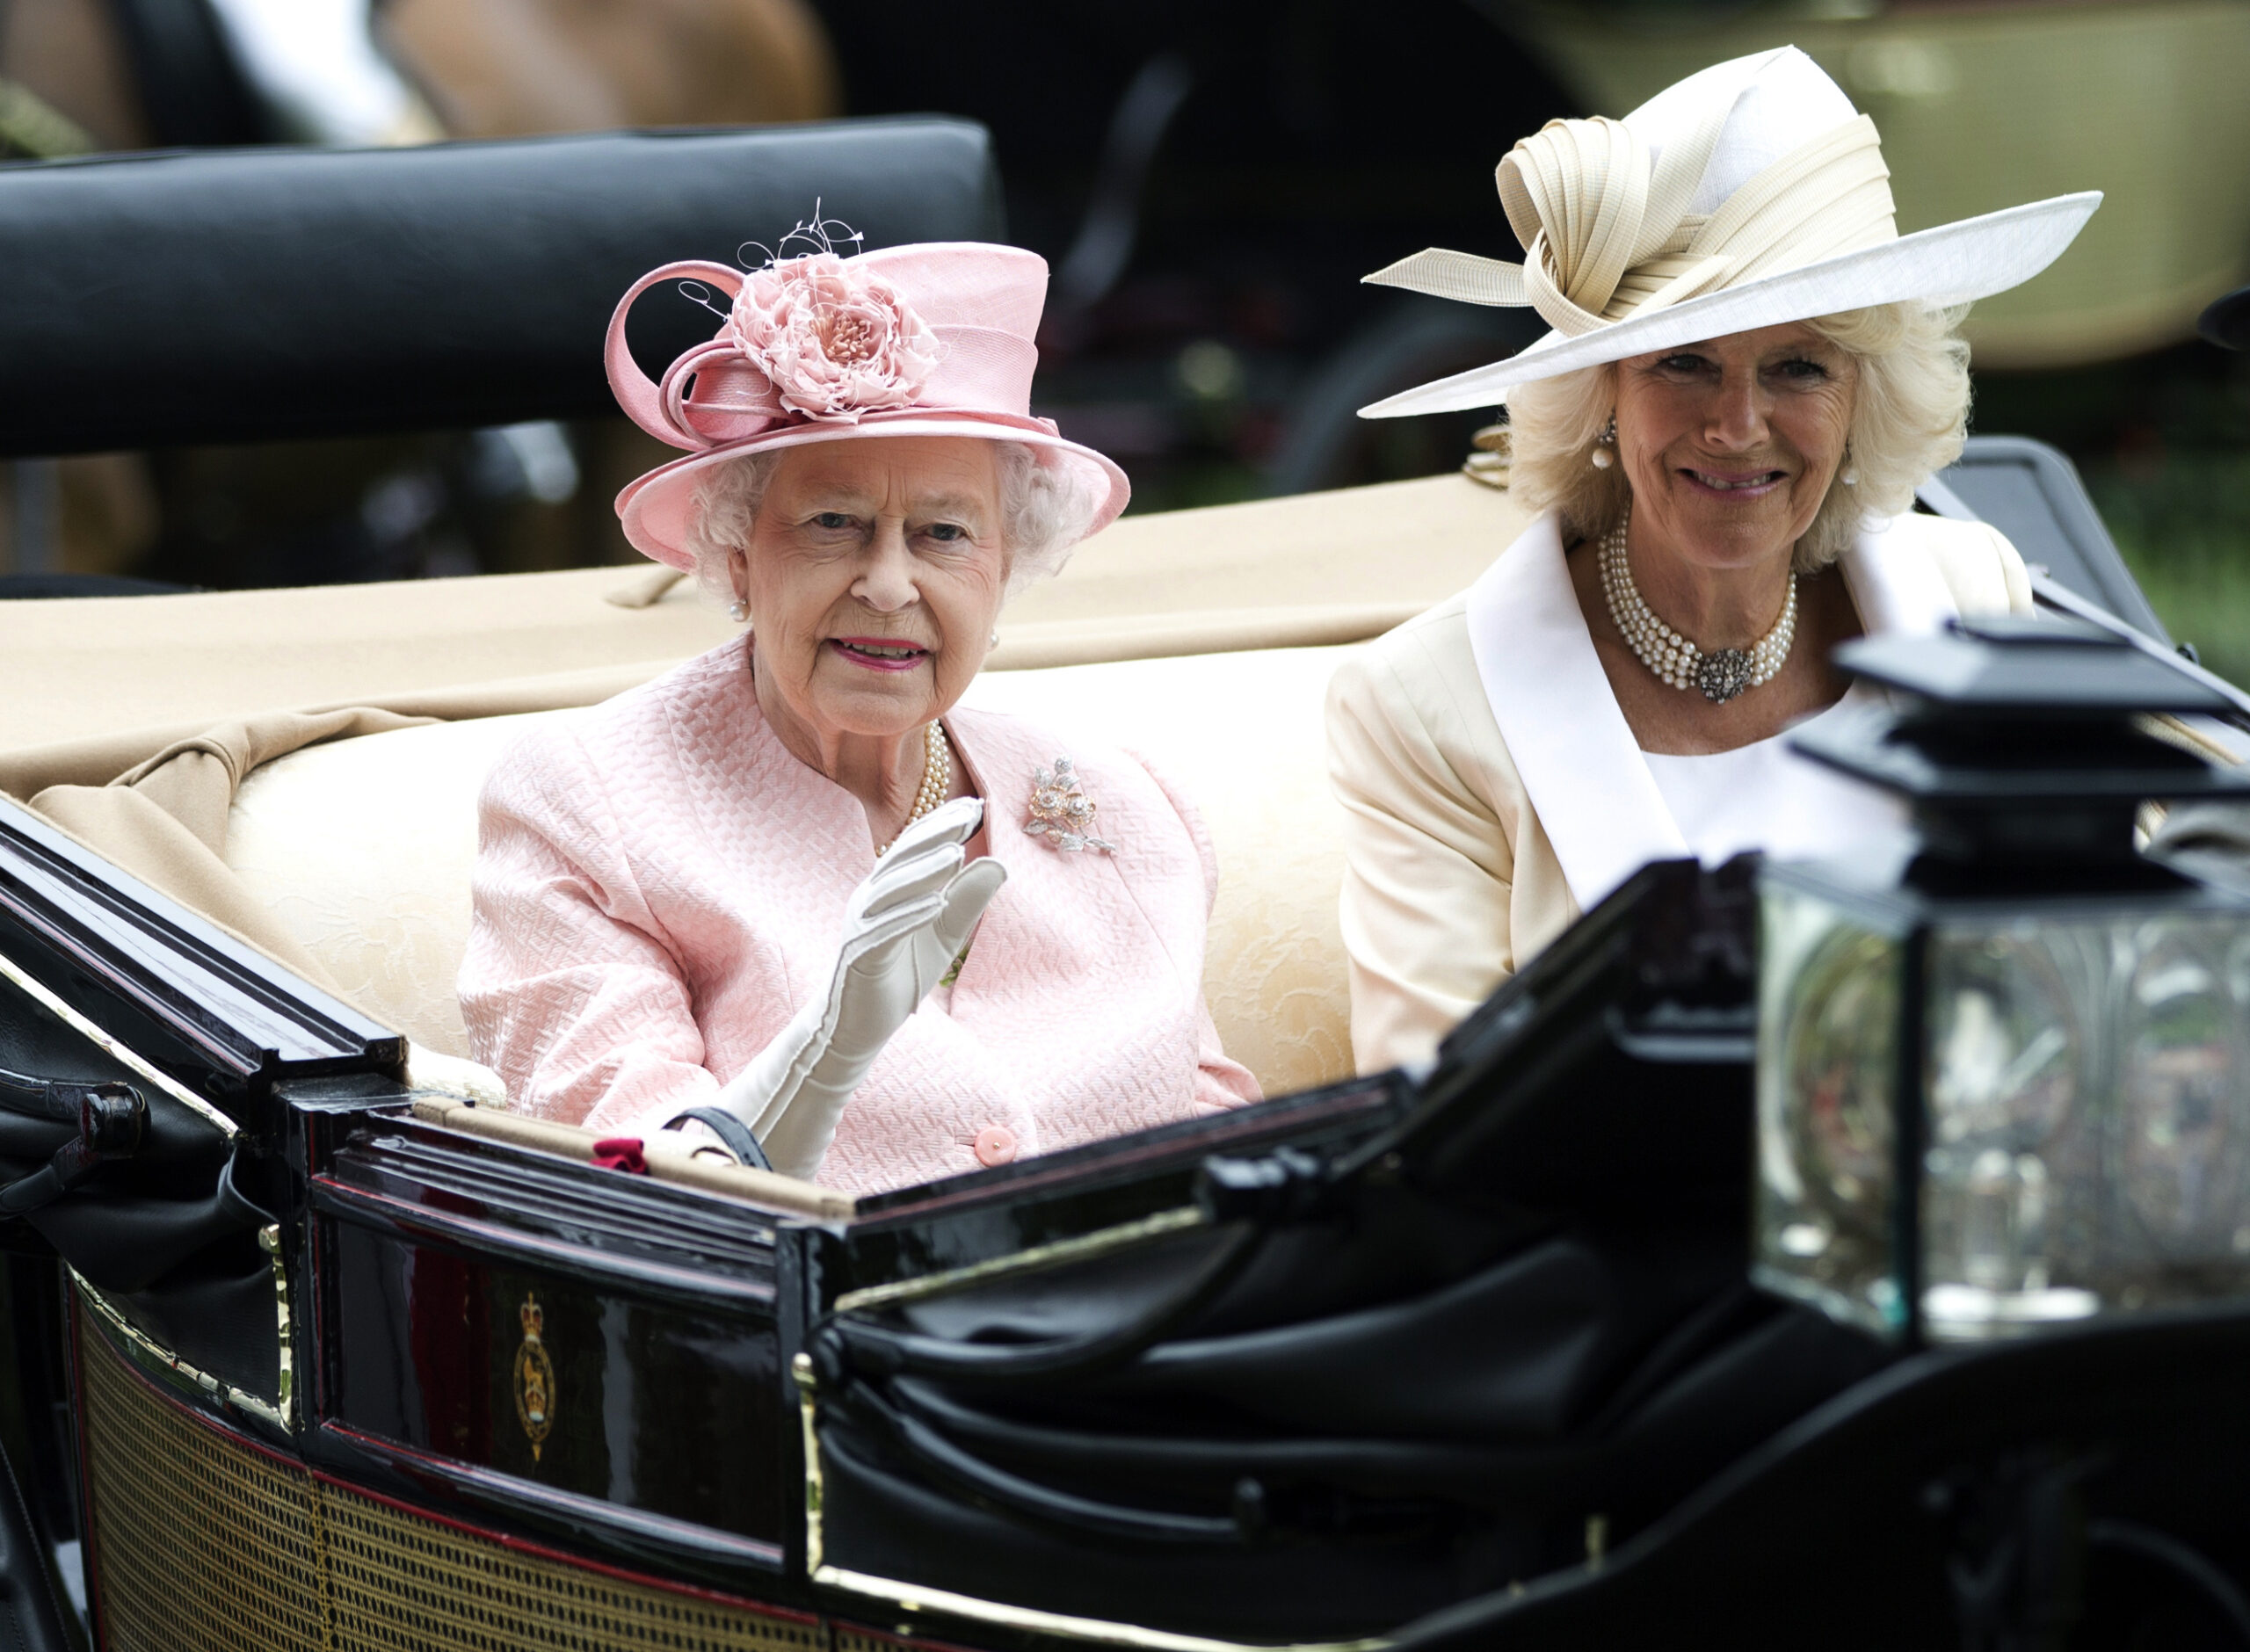 FILE - Britain's Queen Elizabeth II waves to the crowds with Camilla, Duchess of Cornwall at right, as they arrive by carriage on the first day of the Royal Ascot horse race meeting in Ascot, England, Tuesday, June 18, 2013. Queen Elizabeth II has offered her support to have the Duchess of Cornwall become Queen Camilla — using a special Platinum Jubilee message to make a significant decision in shaping the future of the monarchy. (AP Photo/Alastair Grant, File)